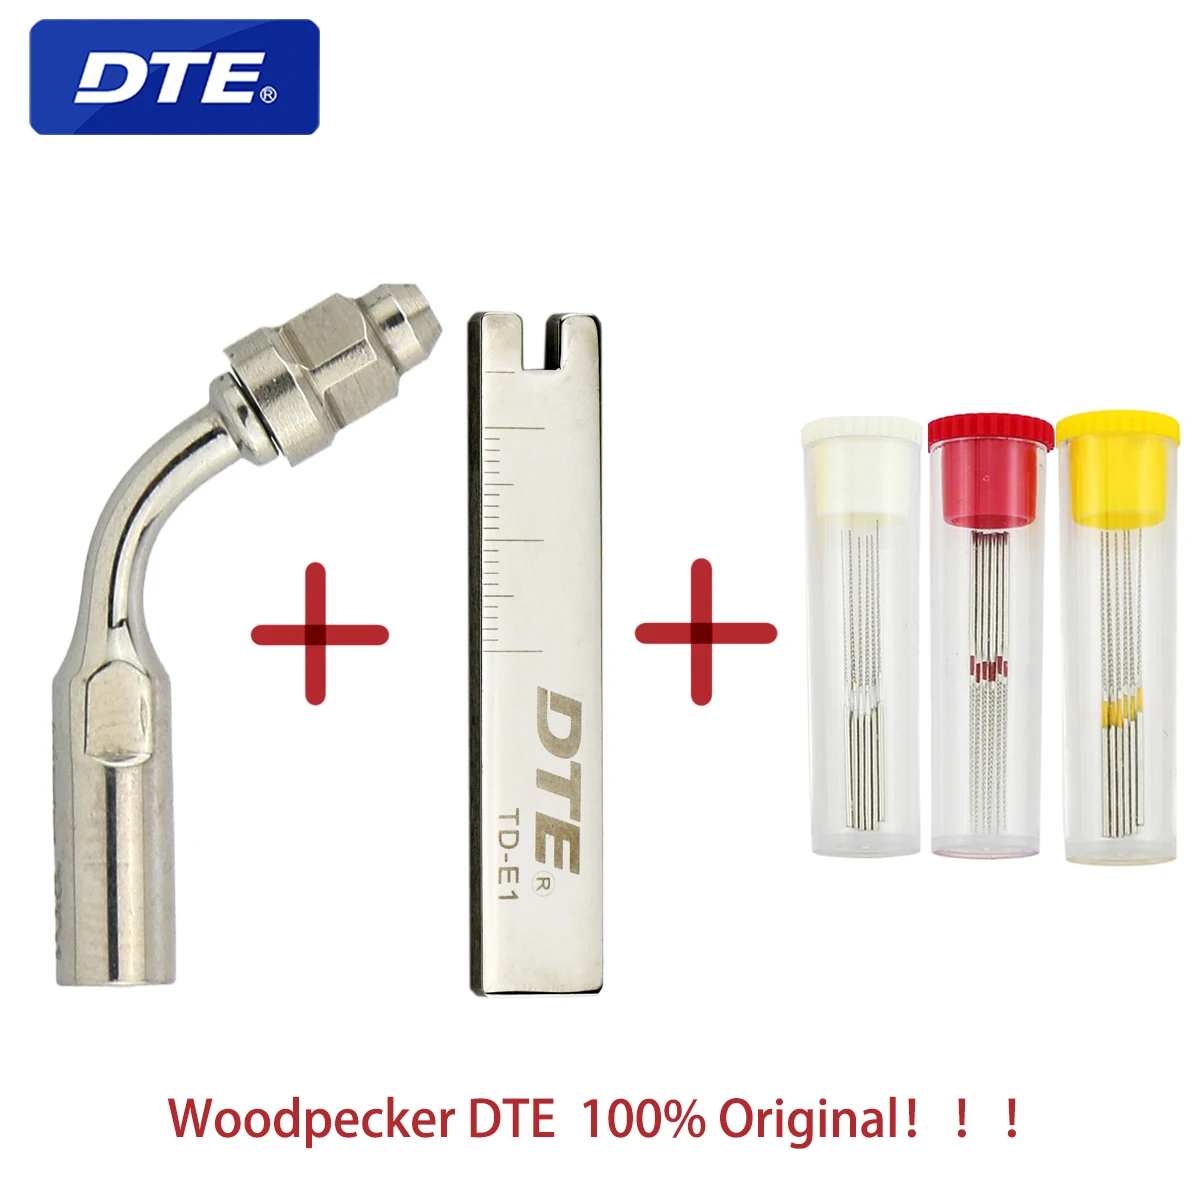 

Woodpecker DTE Dental Tools Ultrasonic Perio Scaler Tip Root Canal Cleaning Kit U-file Wrench Fit EMS UDS SATELEC NSK Handpiece